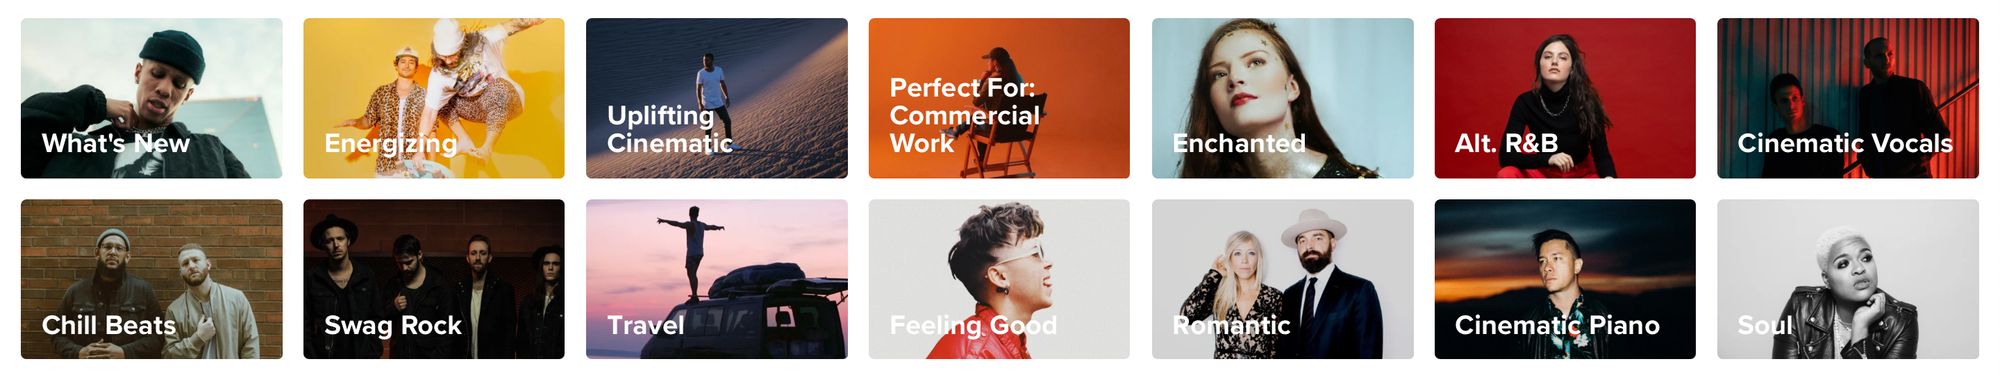 Music for creative projects and content by Musicbed for social media content